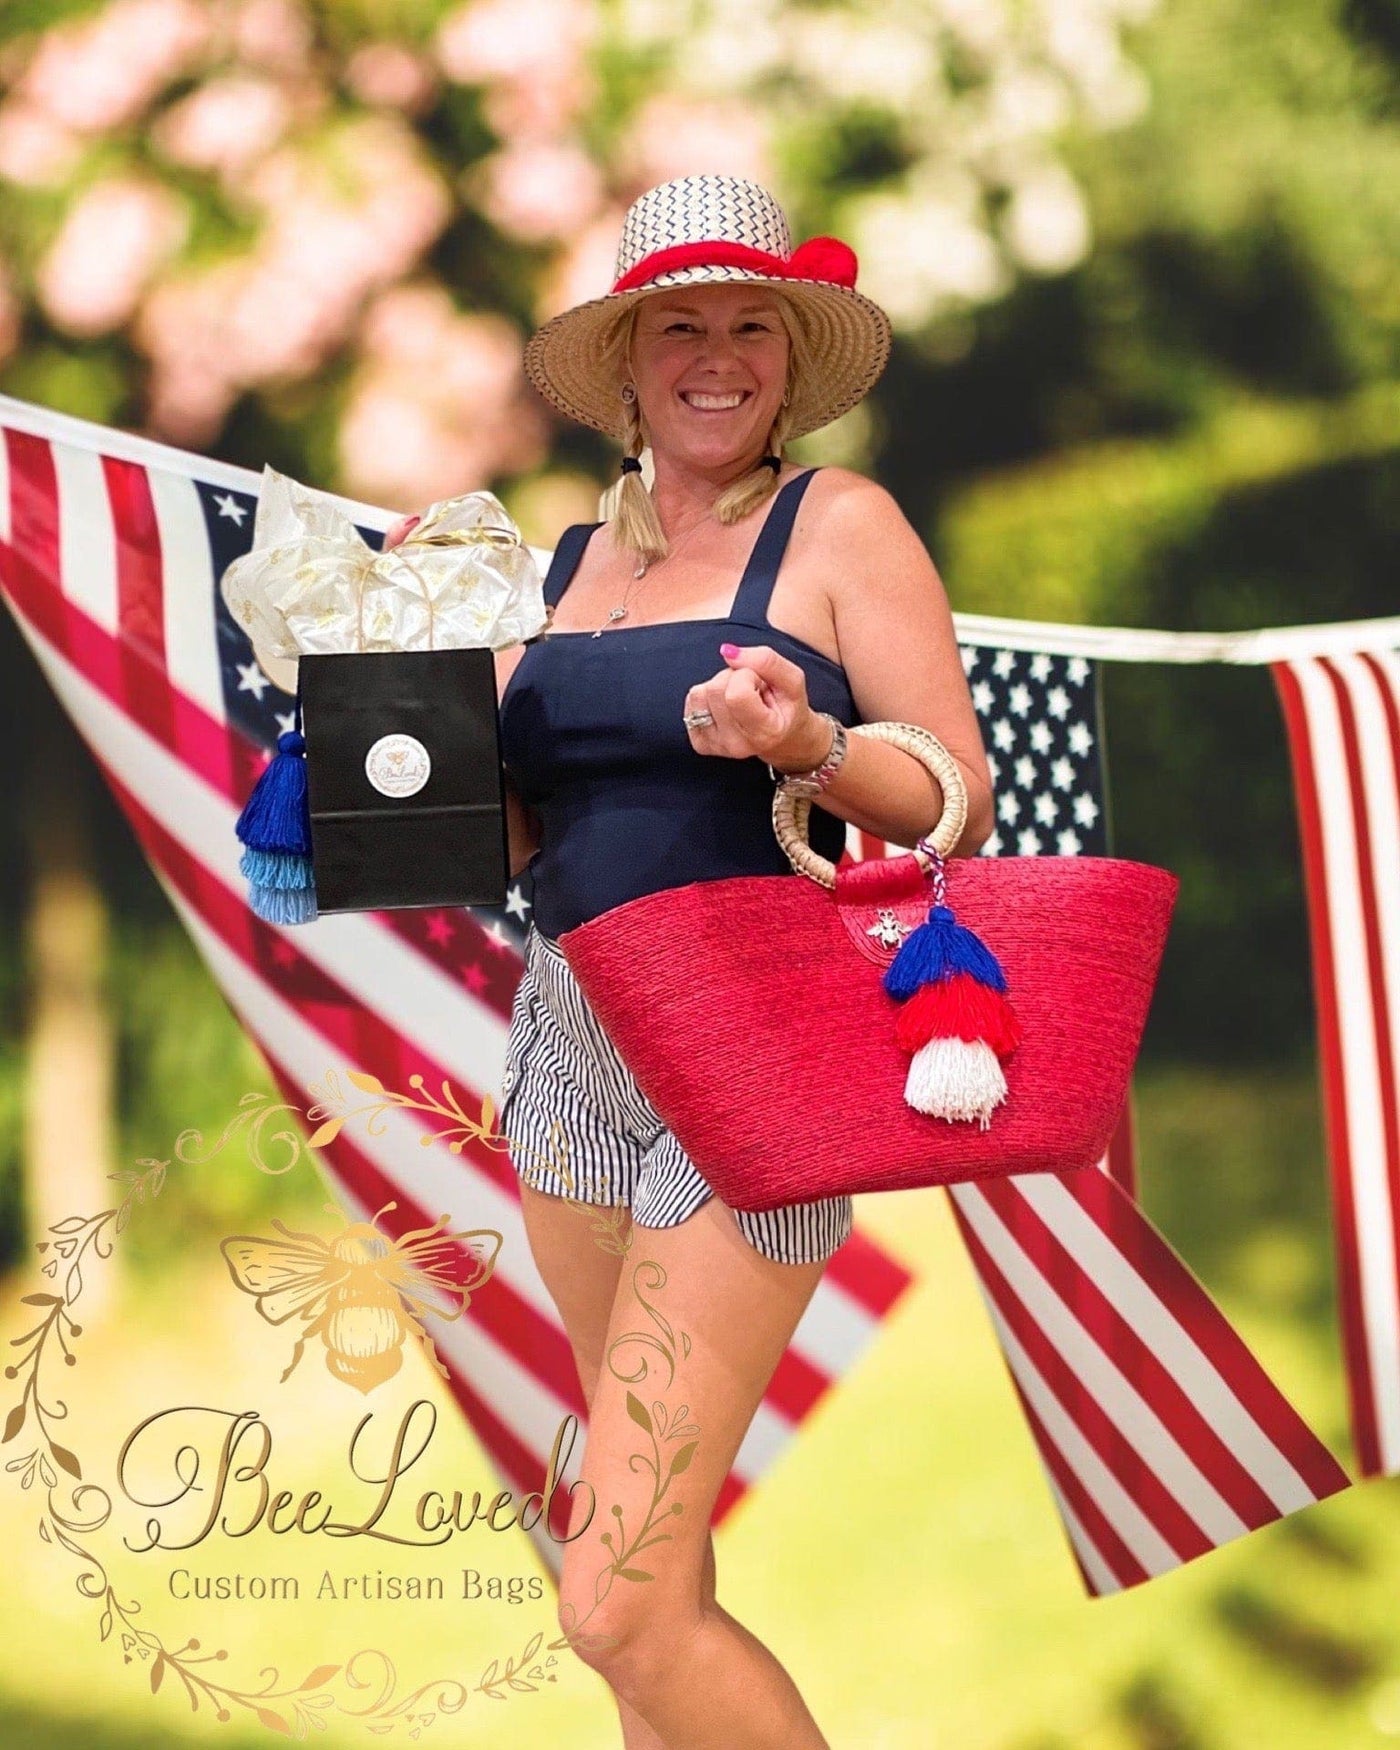 BeeLoved Custom Artisan Bags and Gifts Handbags Red Stripe Red Stripe Palm Tote